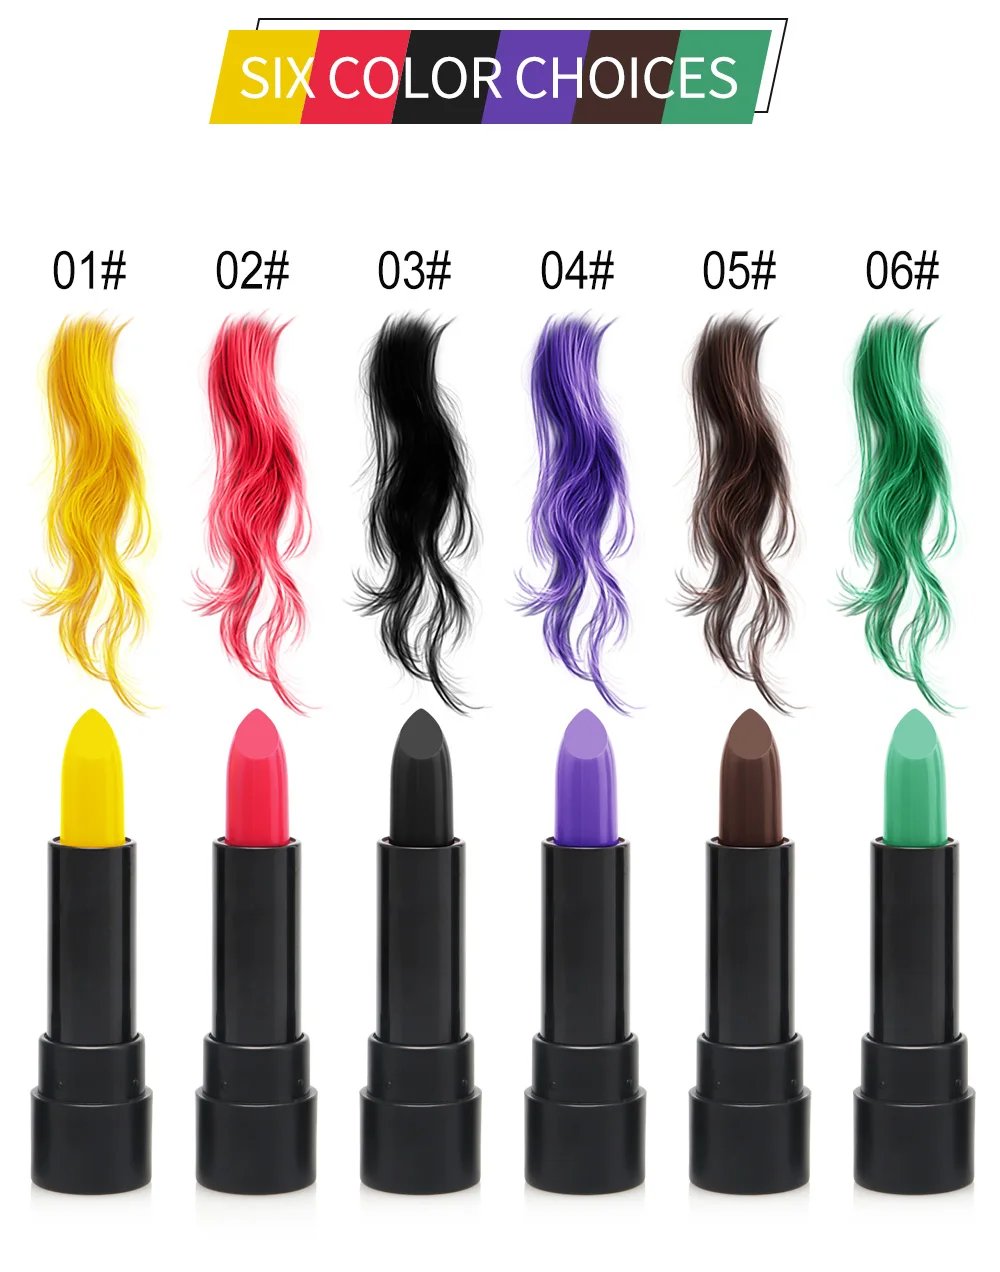 Niceface Temporary Hair Dye Stick Fashion Design White Blue Crayons Hair Color Pen One Time Hair Color Chalk Tool Buy Hair Dye Stick Hair Color Hair Color Pen Product On Alibaba Com